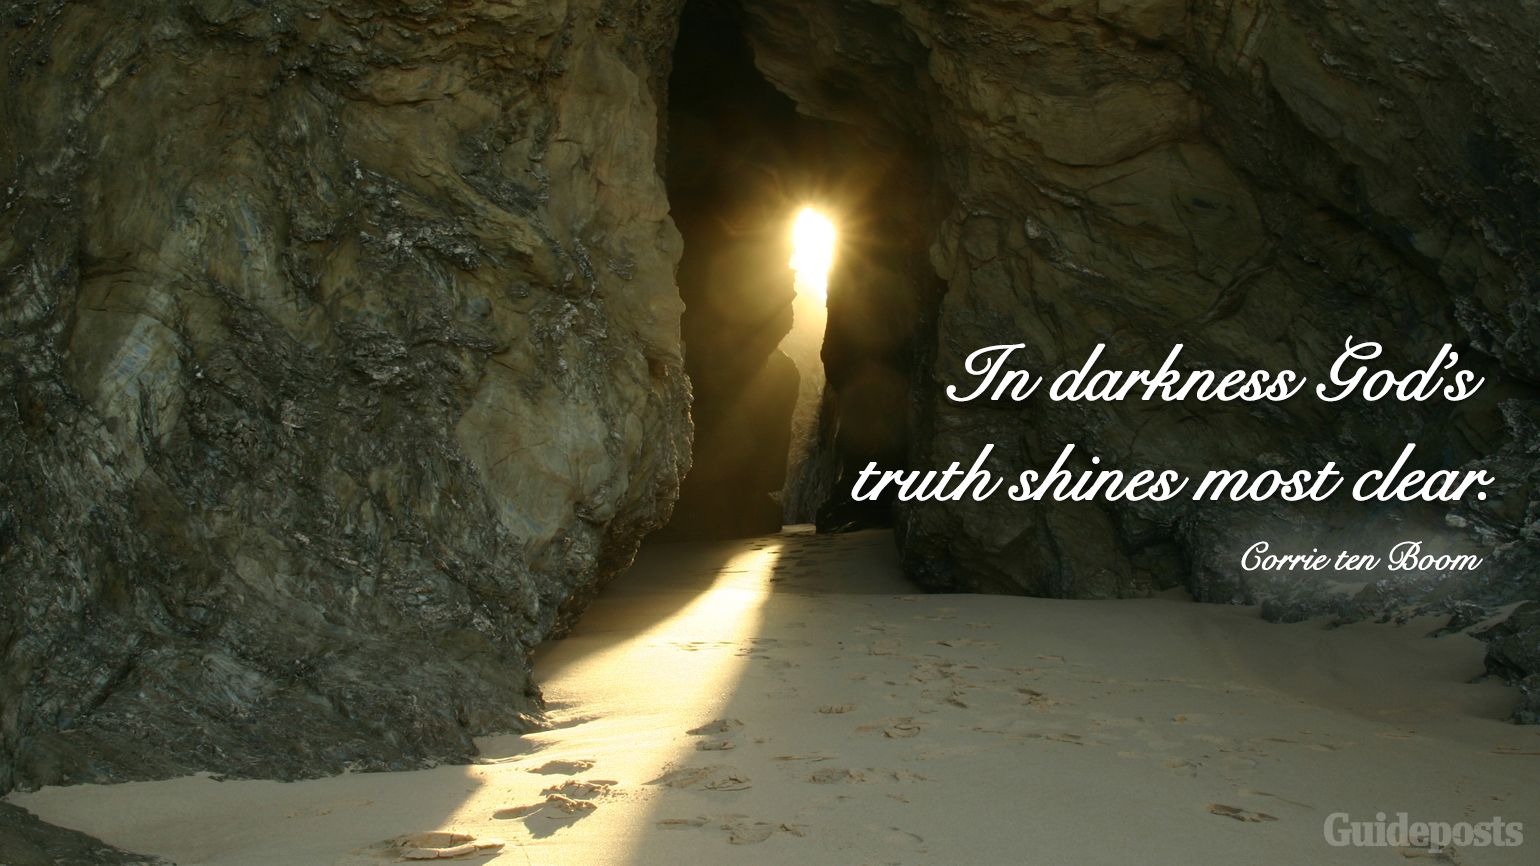 "In darkness God’s truth shines most clear." Inspiring Corrie ten Boom quotes